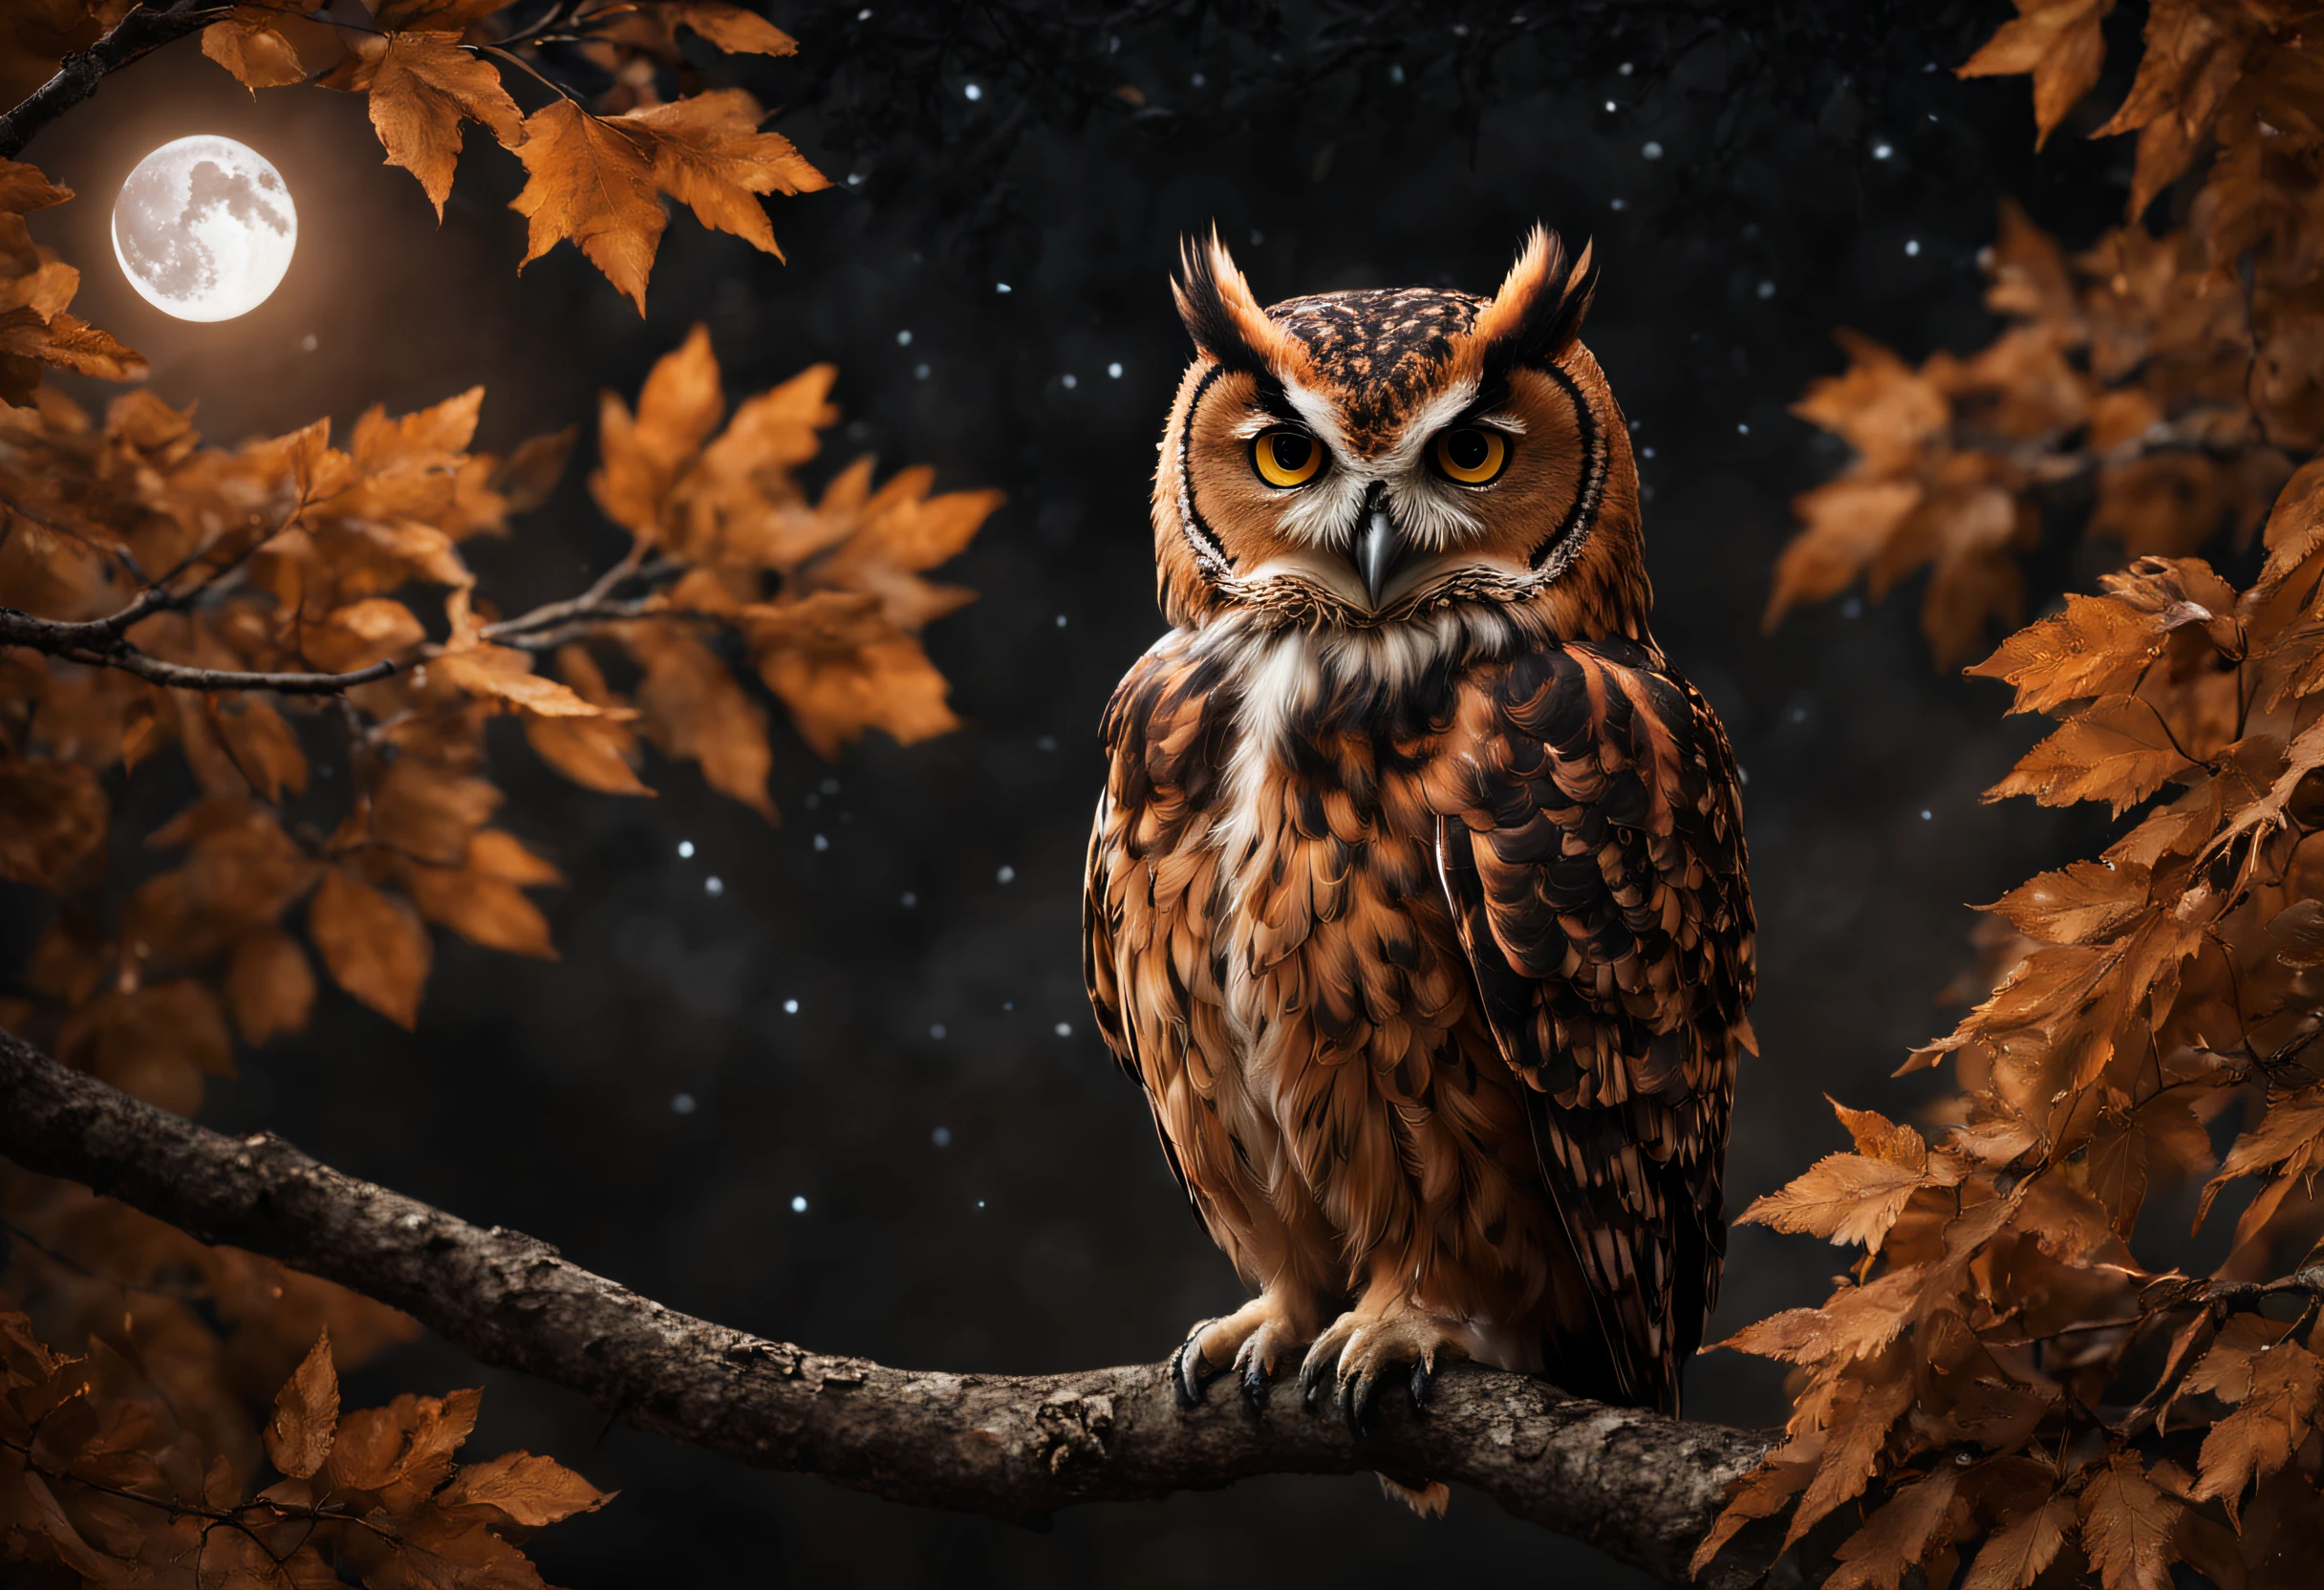 "RAW photo, best, masterpiece, best quality, high quality, extremely detailed, a rust brown owl with black spots, in a leafy tree, it's a crescent moon night, stars in the sky, cinematic color, scene from a movie , intricate details, the best quality, very realistic."